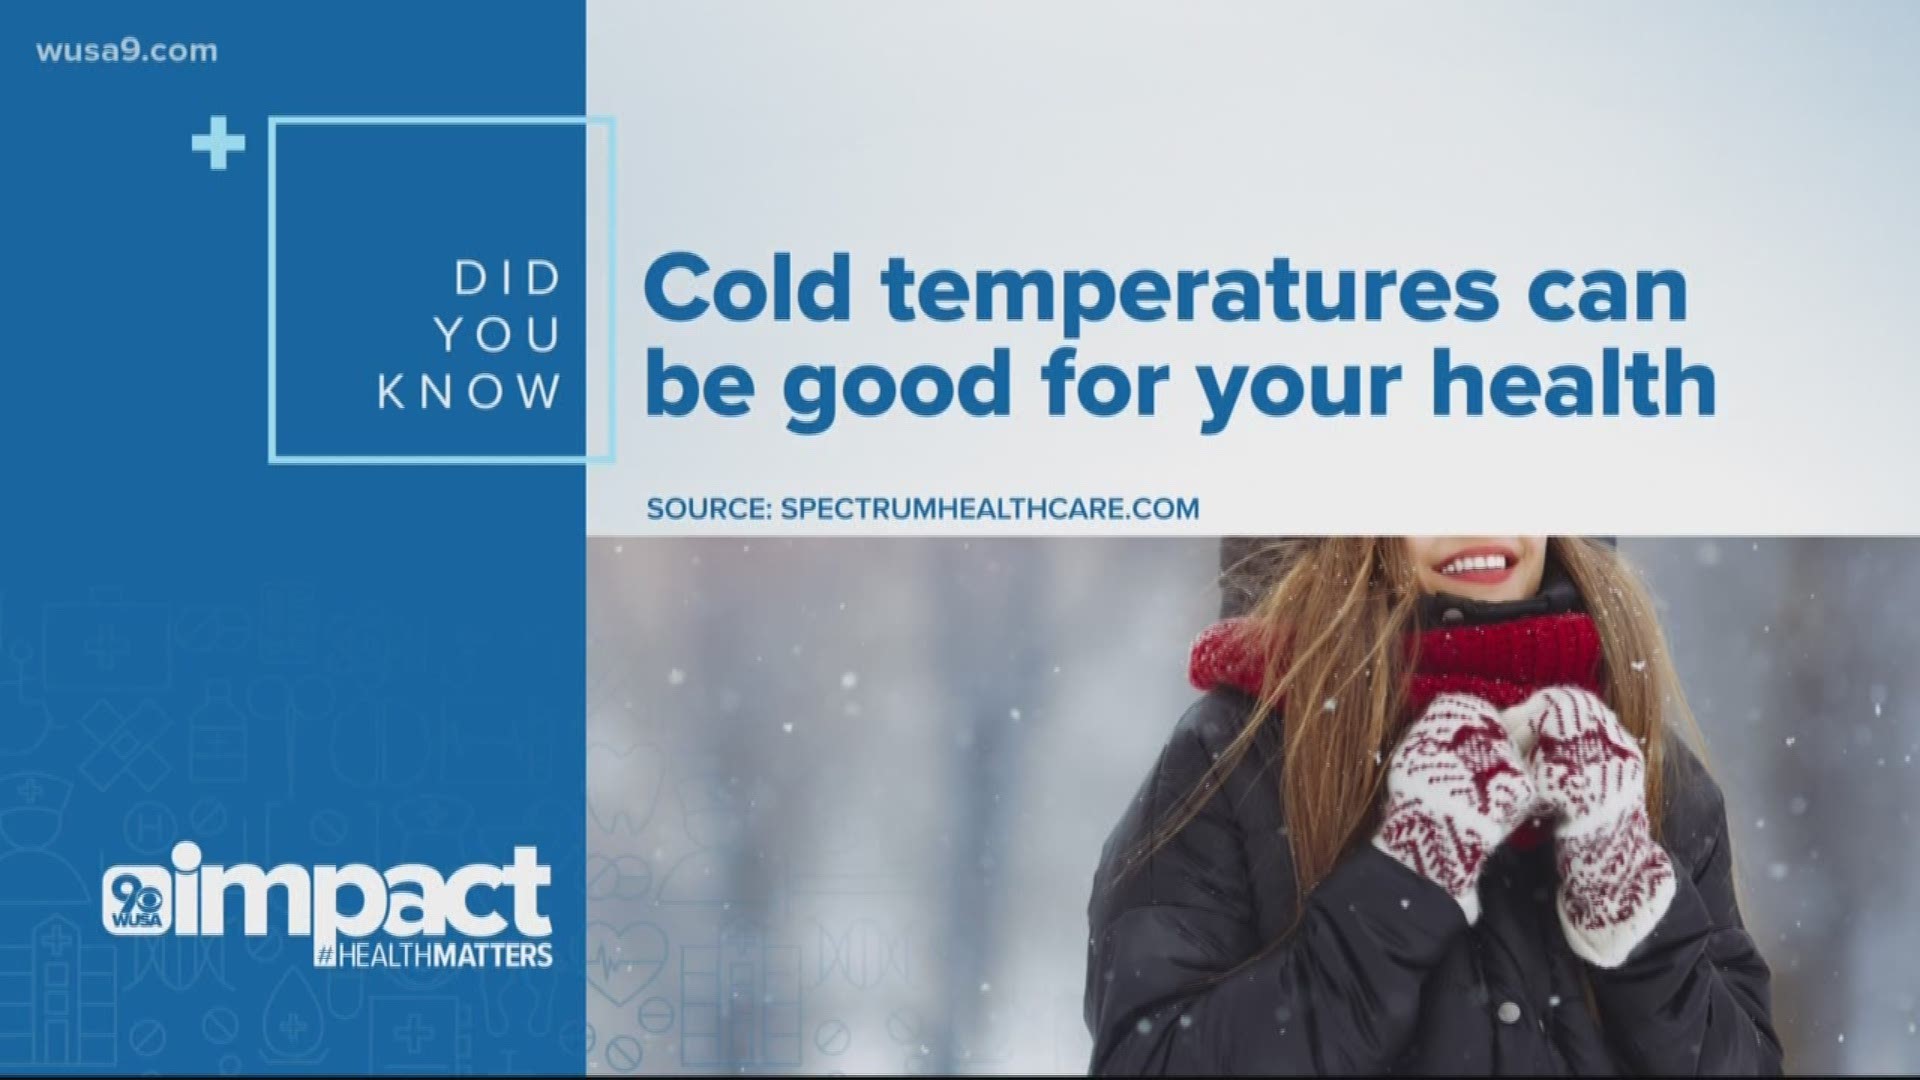 Colder temperatures may help reduce allergies and inflammation and research has shown that it can help you think more clearly and perform daily tasks better.